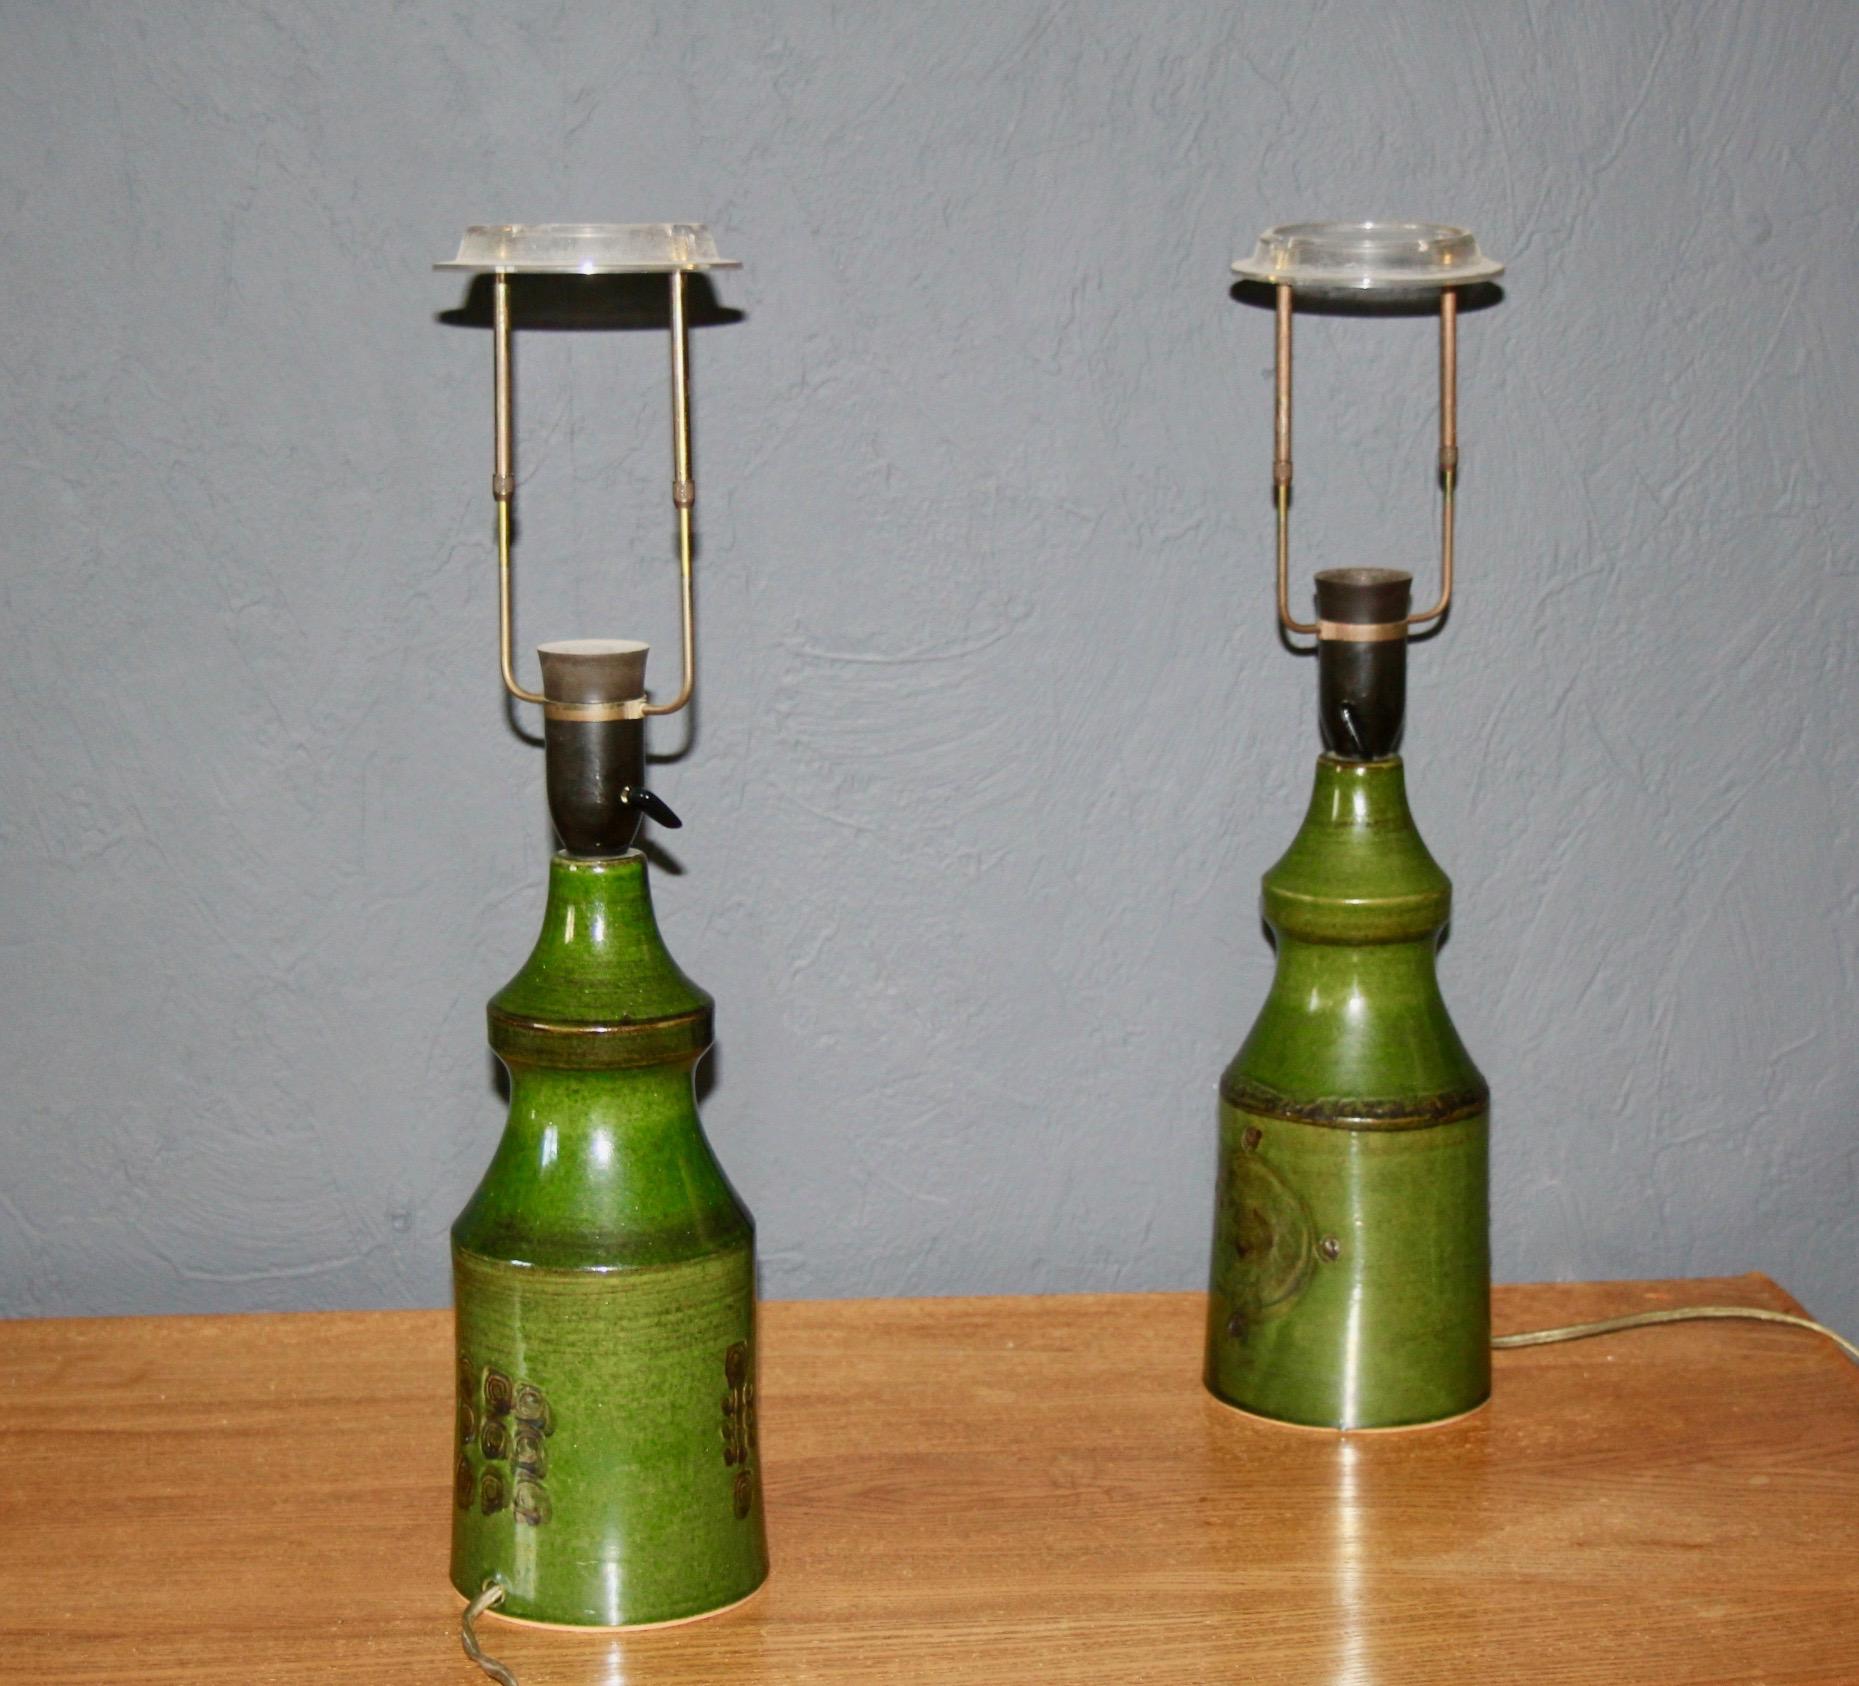 Pair of green ceramic engraved at the bottom danish table lamps.
Some small stains on the shades but can be turned in a way that you don't see them from the front.